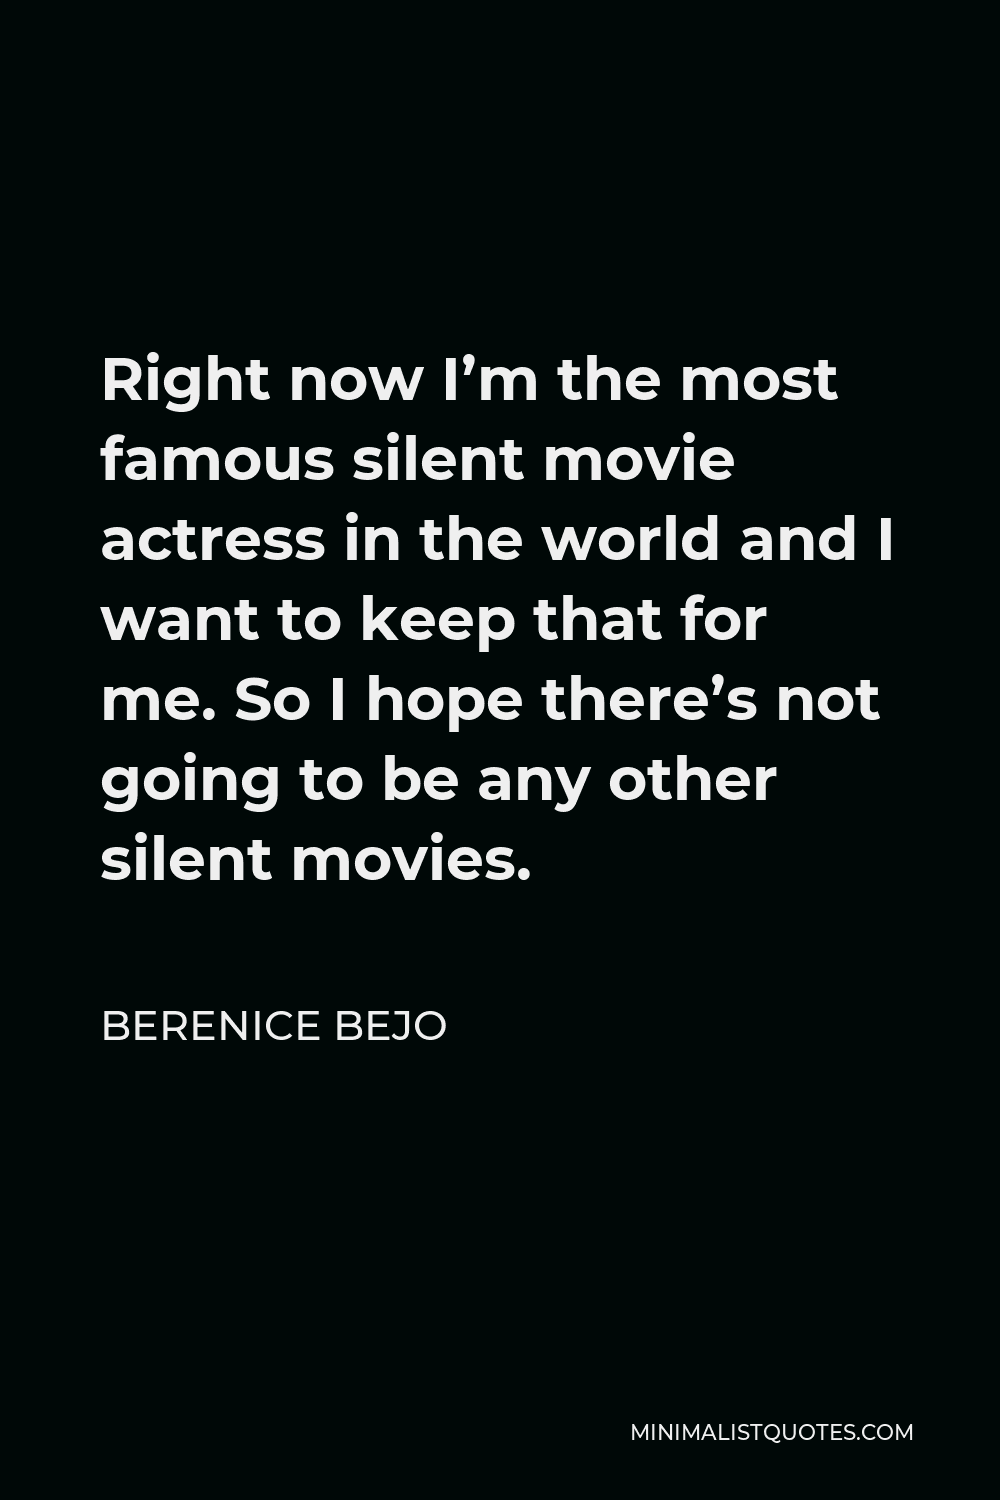 Berenice Bejo Quote - Right now I’m the most famous silent movie actress in the world and I want to keep that for me. So I hope there’s not going to be any other silent movies.